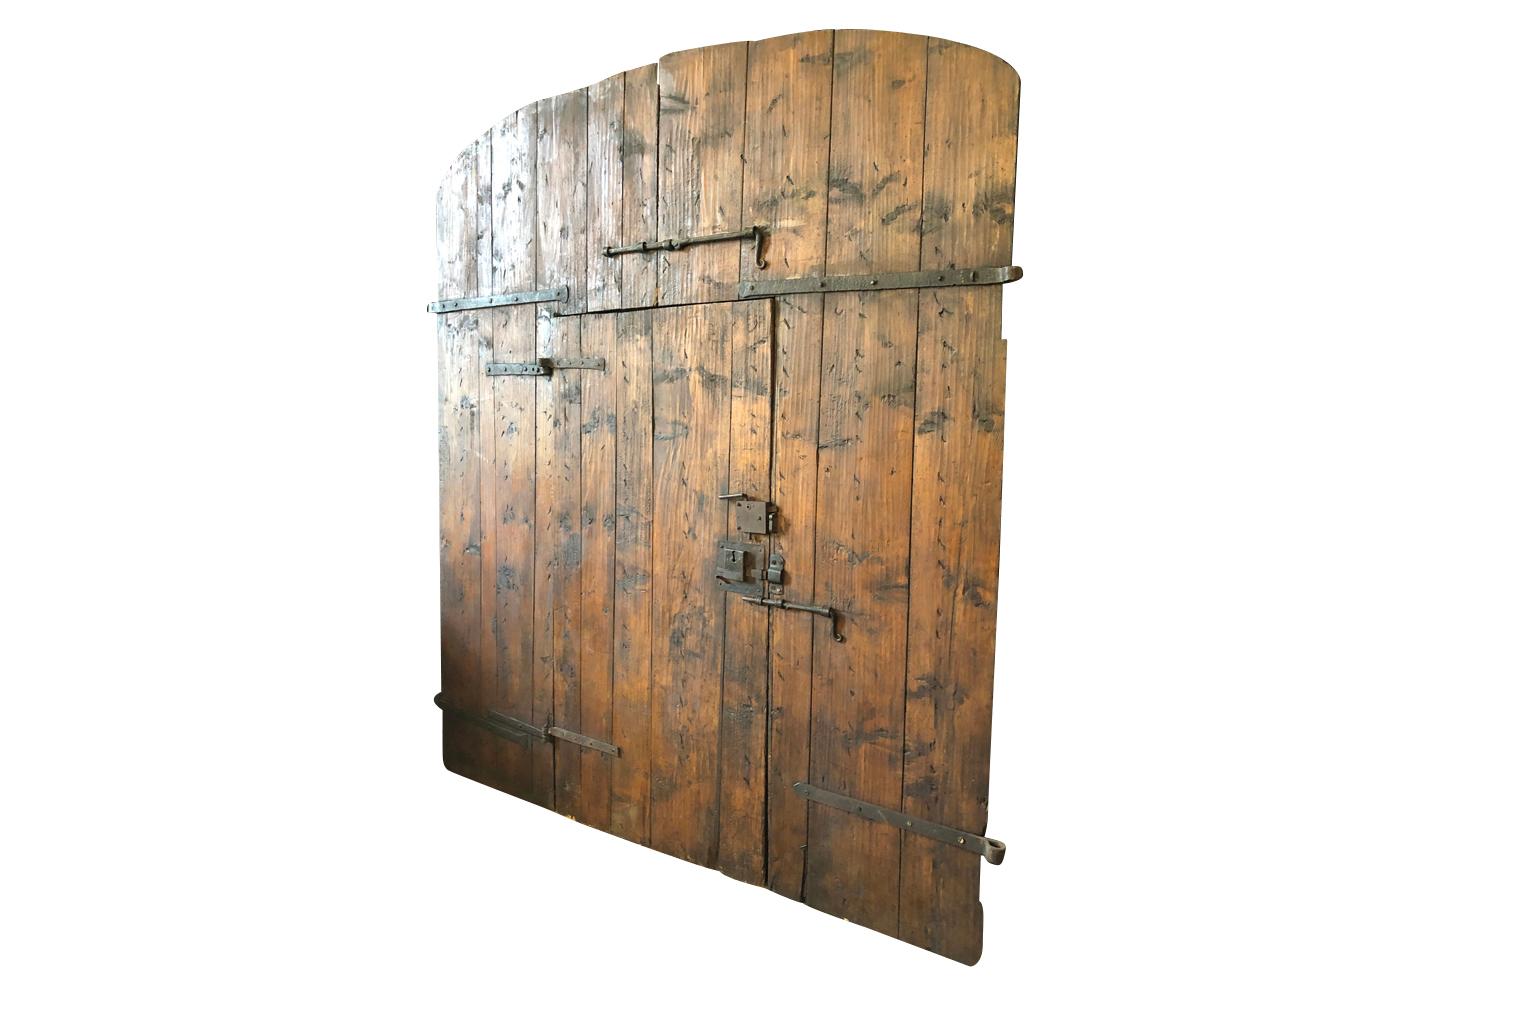 Tremendous 18th century entry doors from the Tuscan region of Italy. Soundly constructed from hard pine with excellent iron fittings. Beautiful from both sides. Great patina.